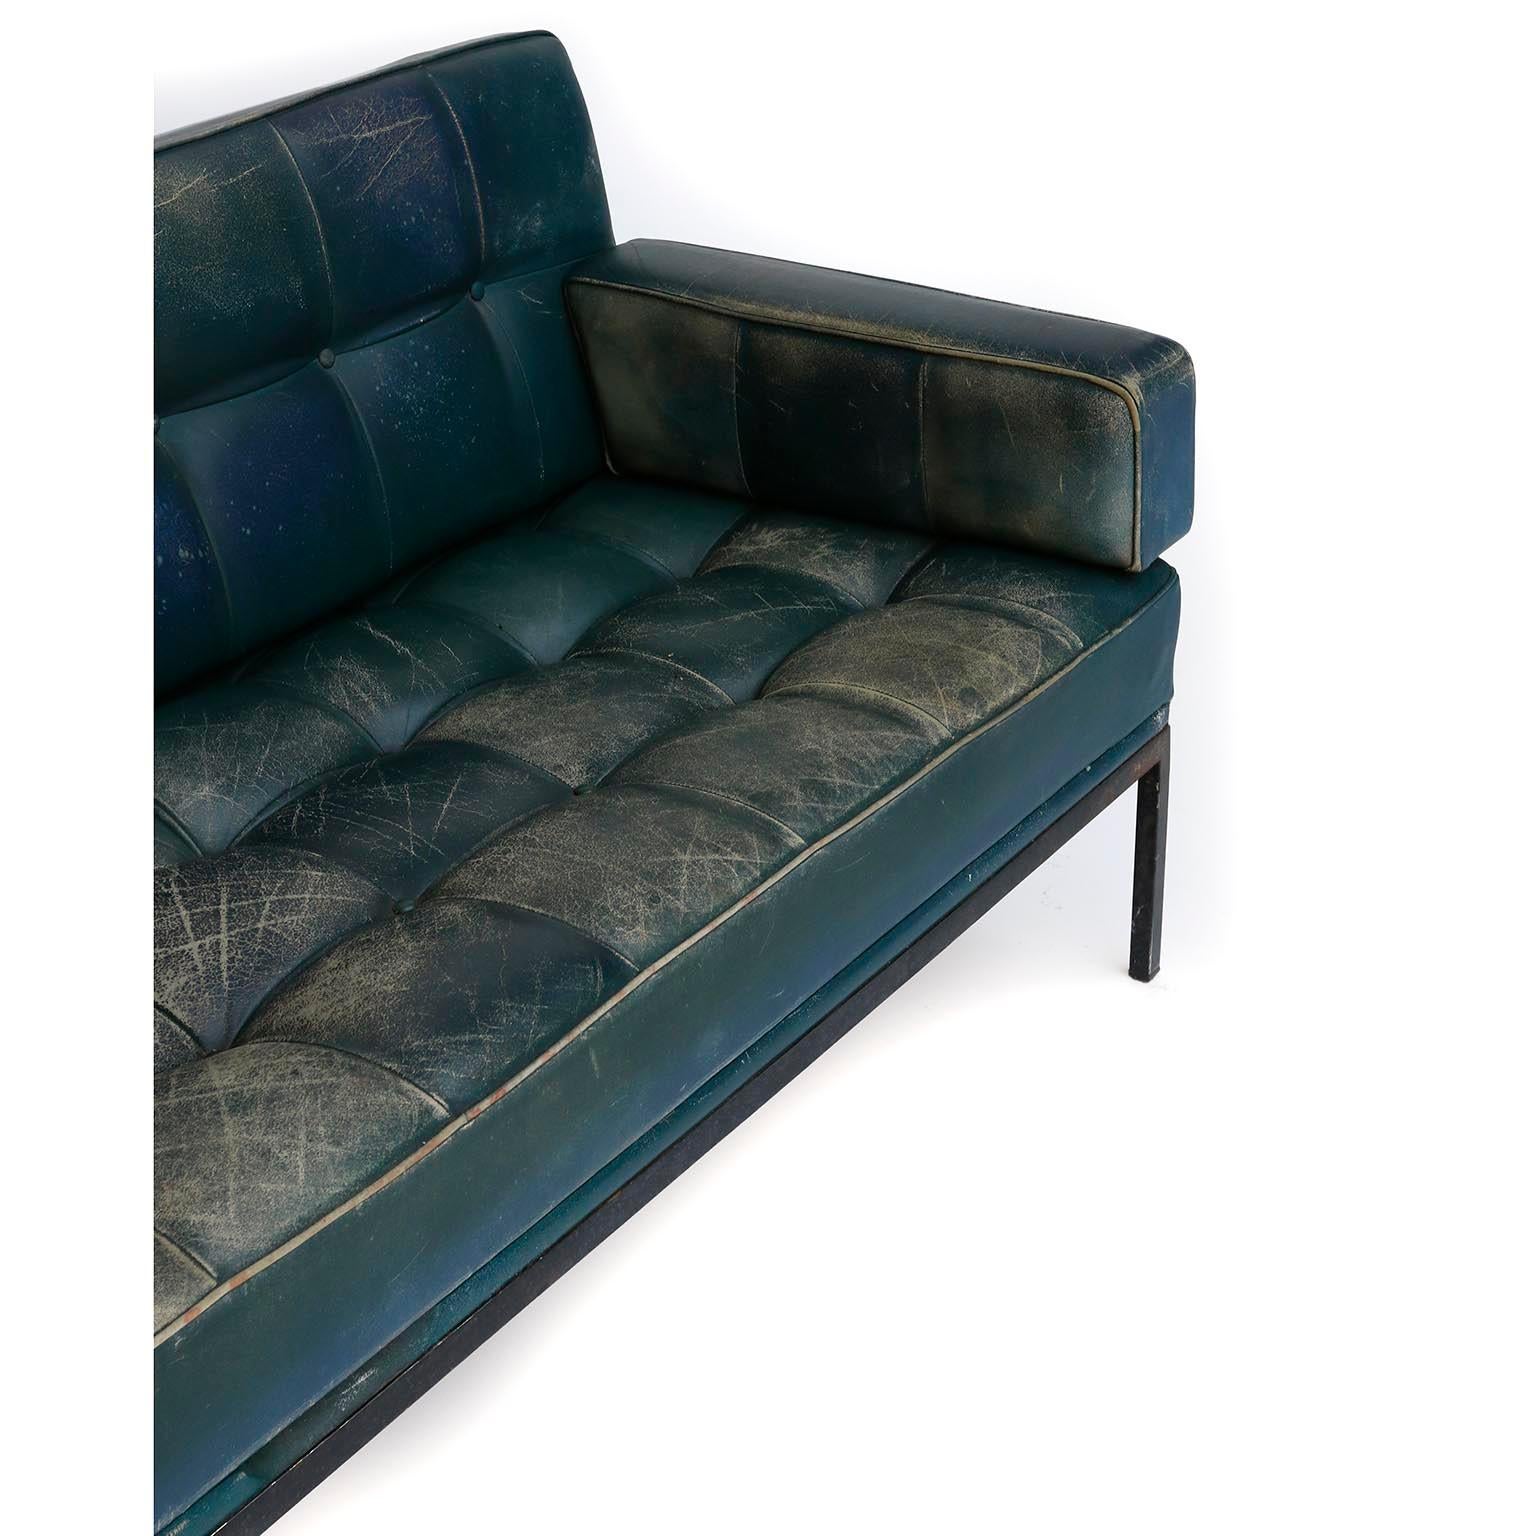 Johannes Spalt 'Constanze' Sofa Daybed Armrests, Patinated Green Leather, 1960s 3